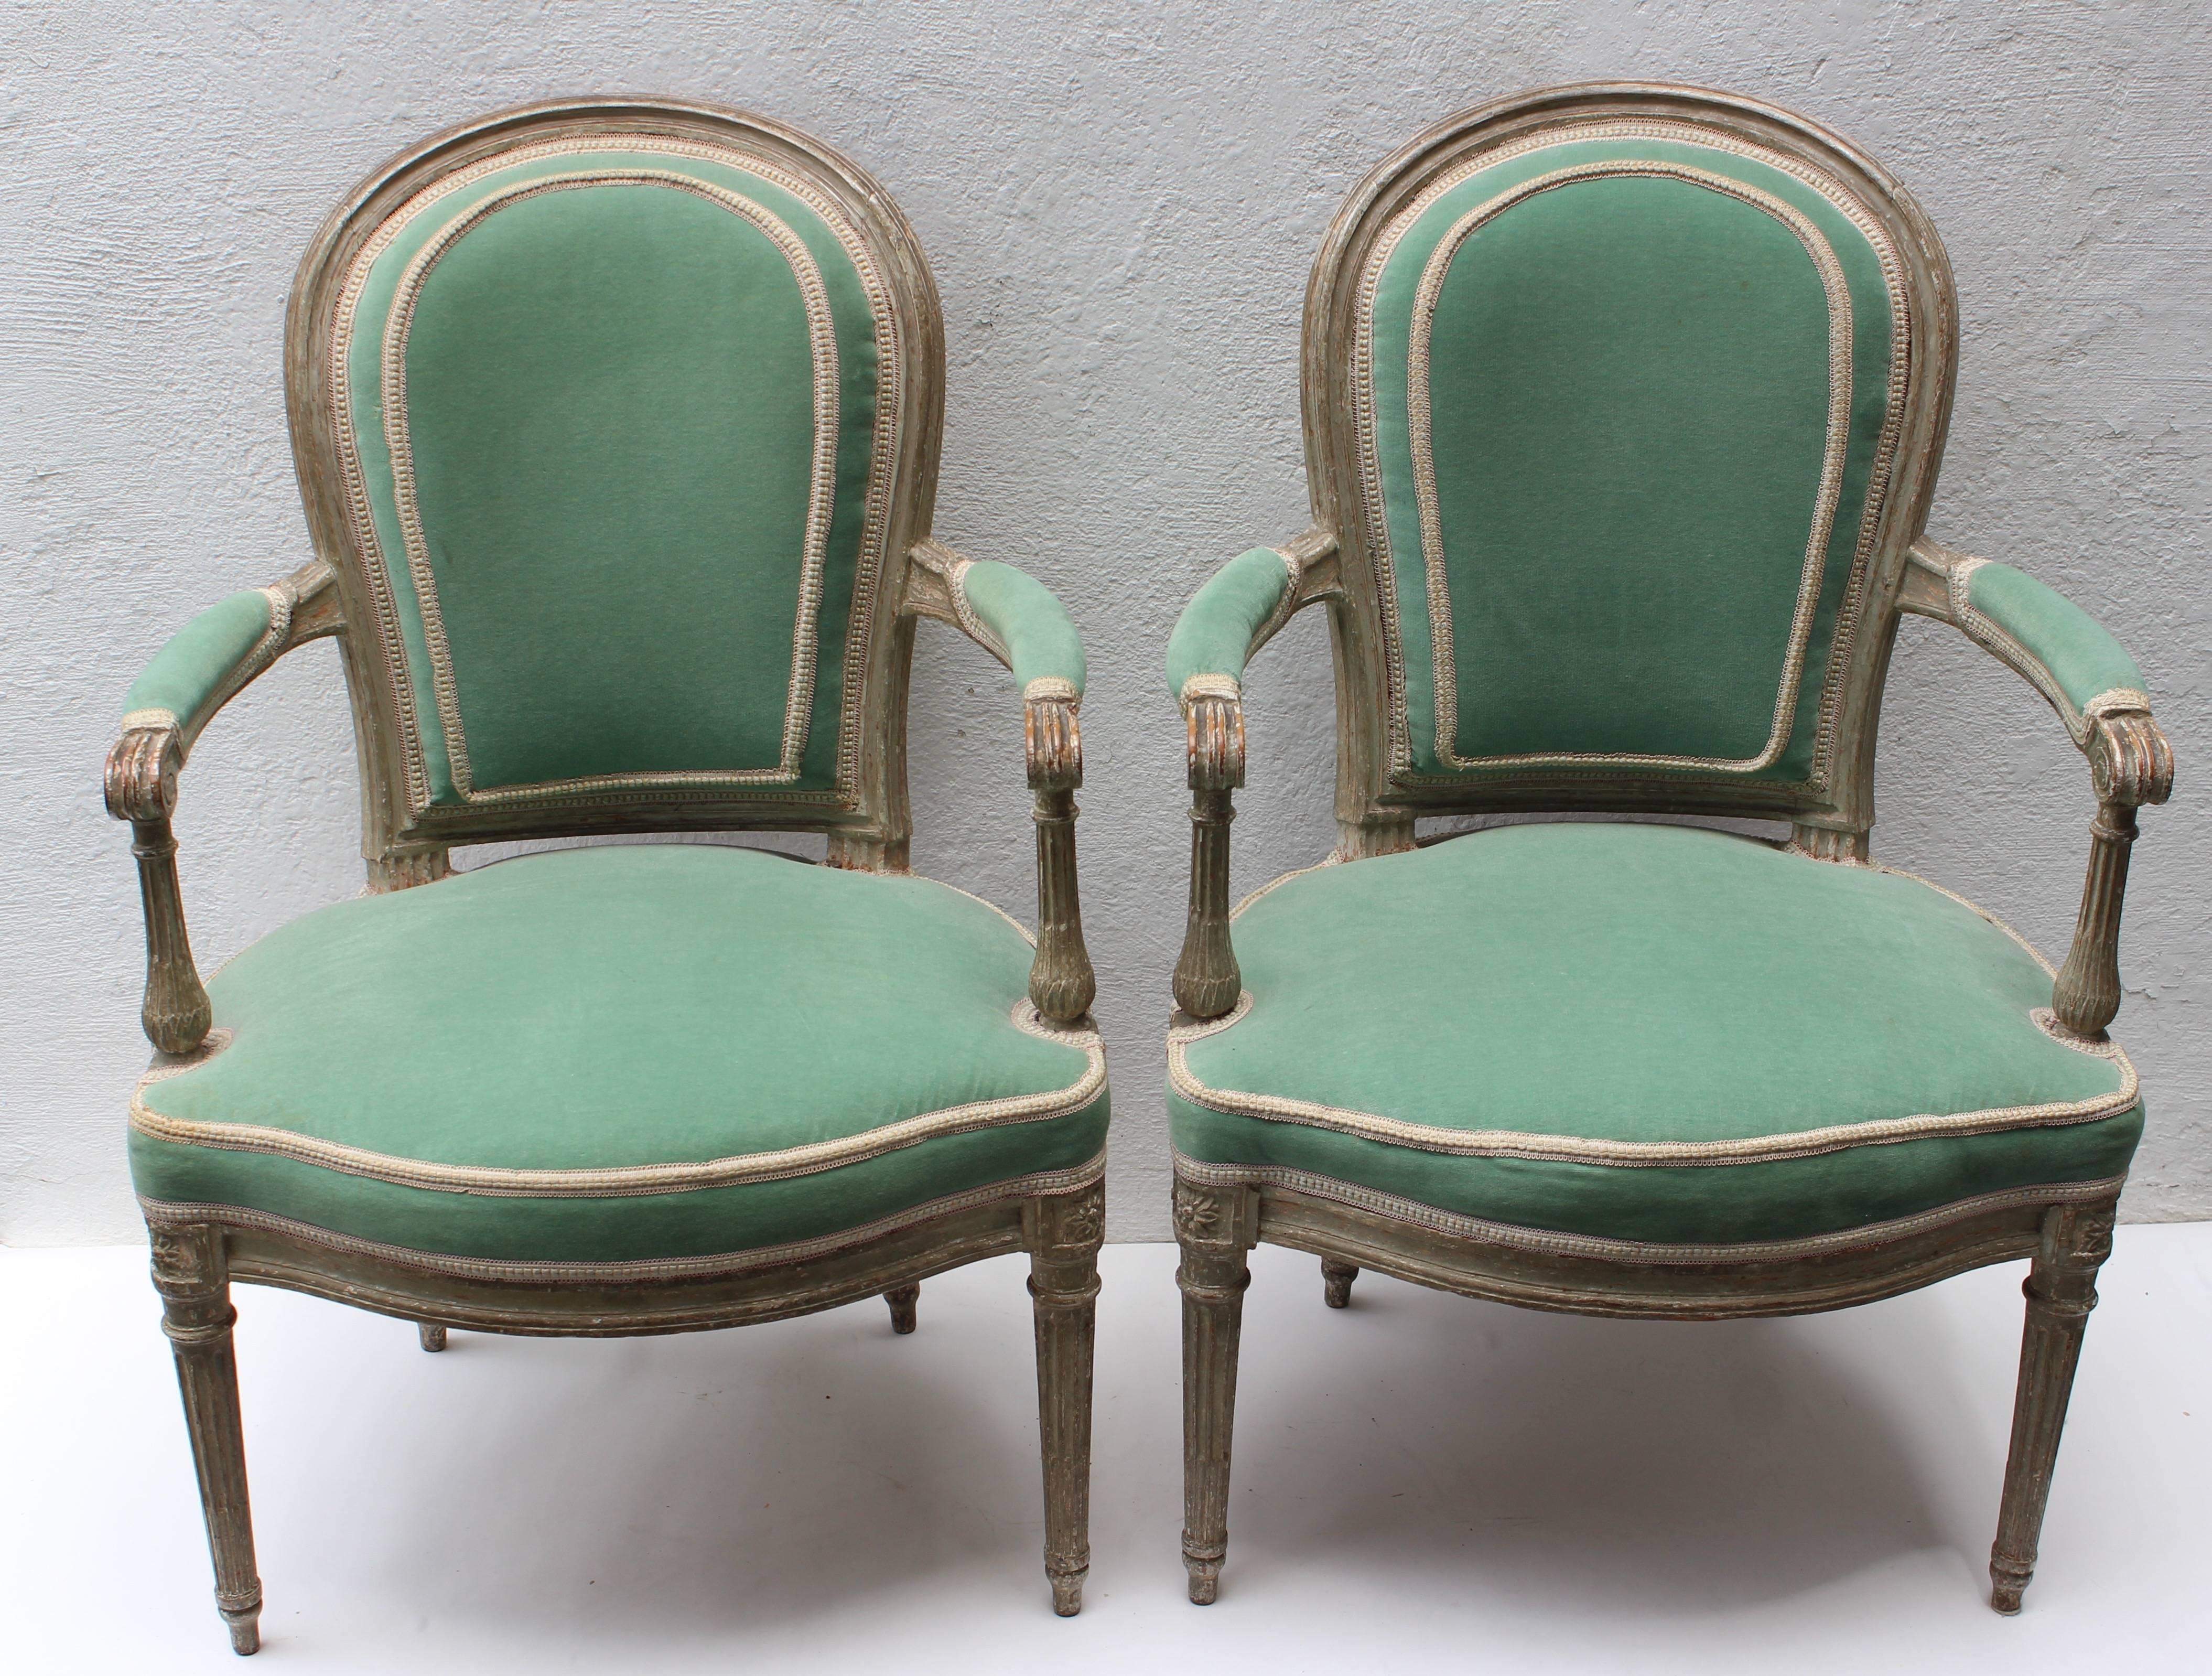 Pair of Louis XVI painted white fauteuils en cabriolet attributed to Georges Jacob (1739-1814) circa 1780.

With round channel-moulded backrest issuing straight scrolled arms with manchettes above serpentine U-form seat, the conforming seatrail